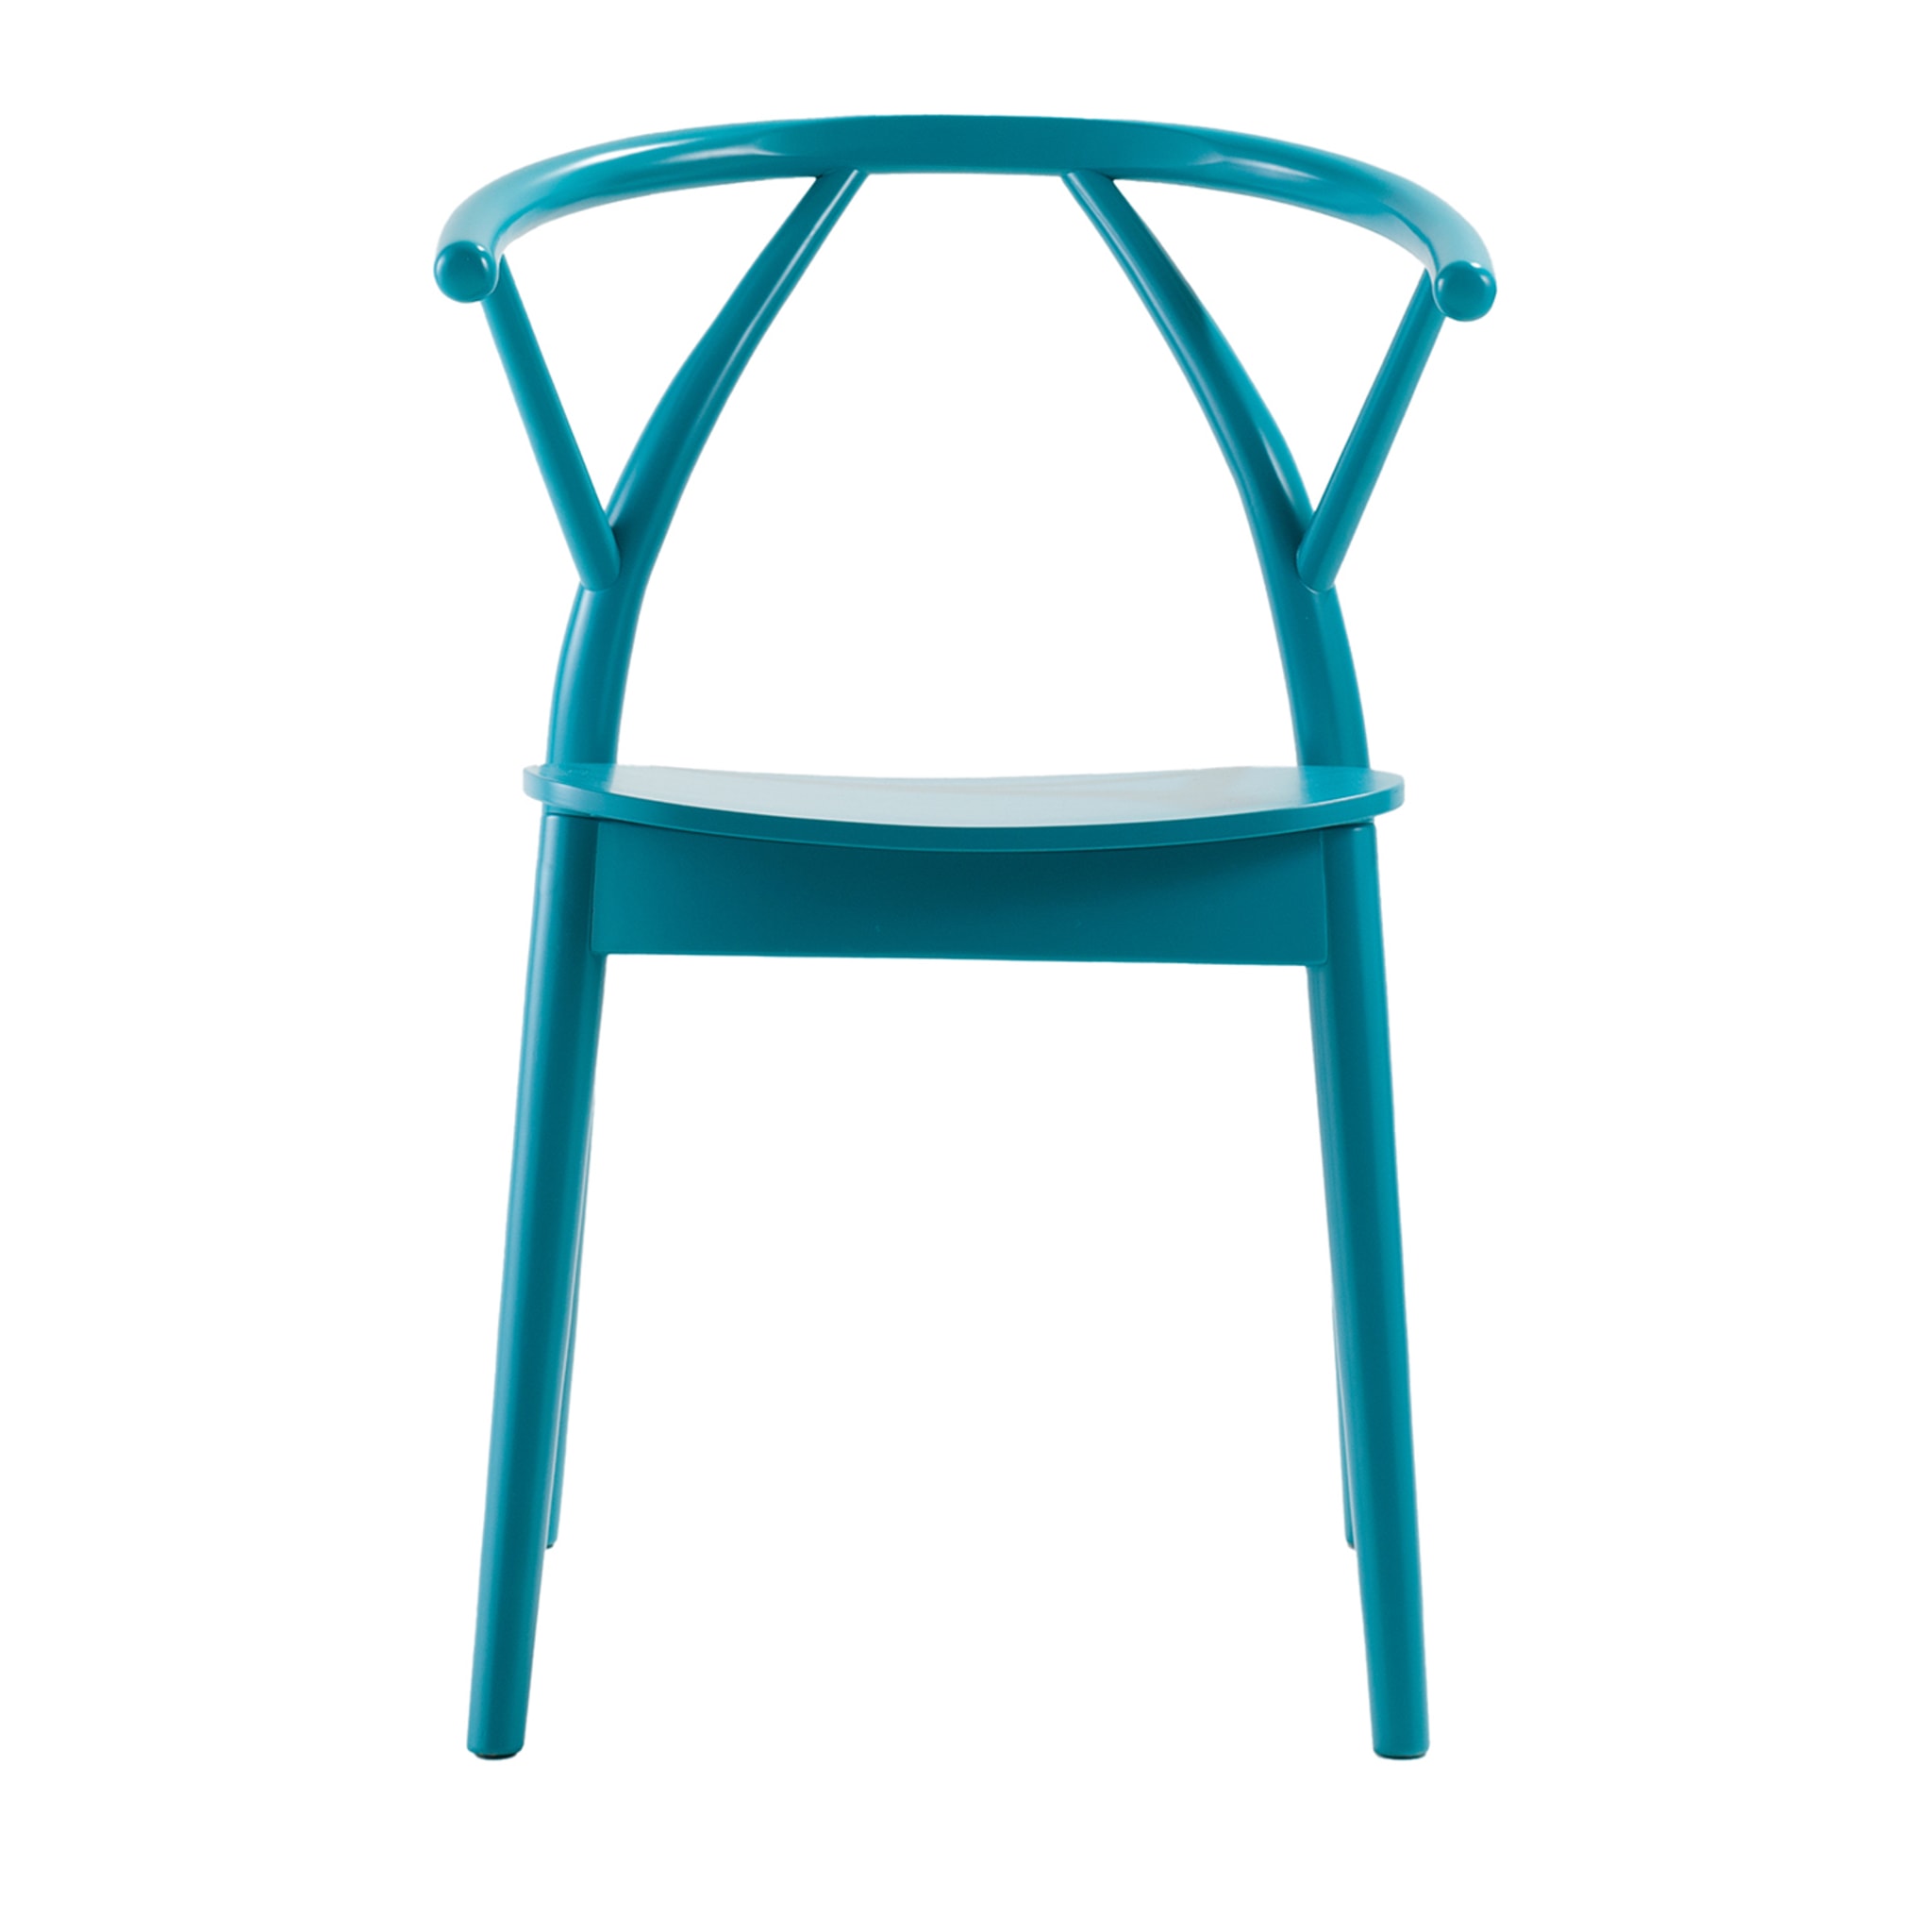 Yelly 971 Light Blue Chair by Markus Johansson - Main view